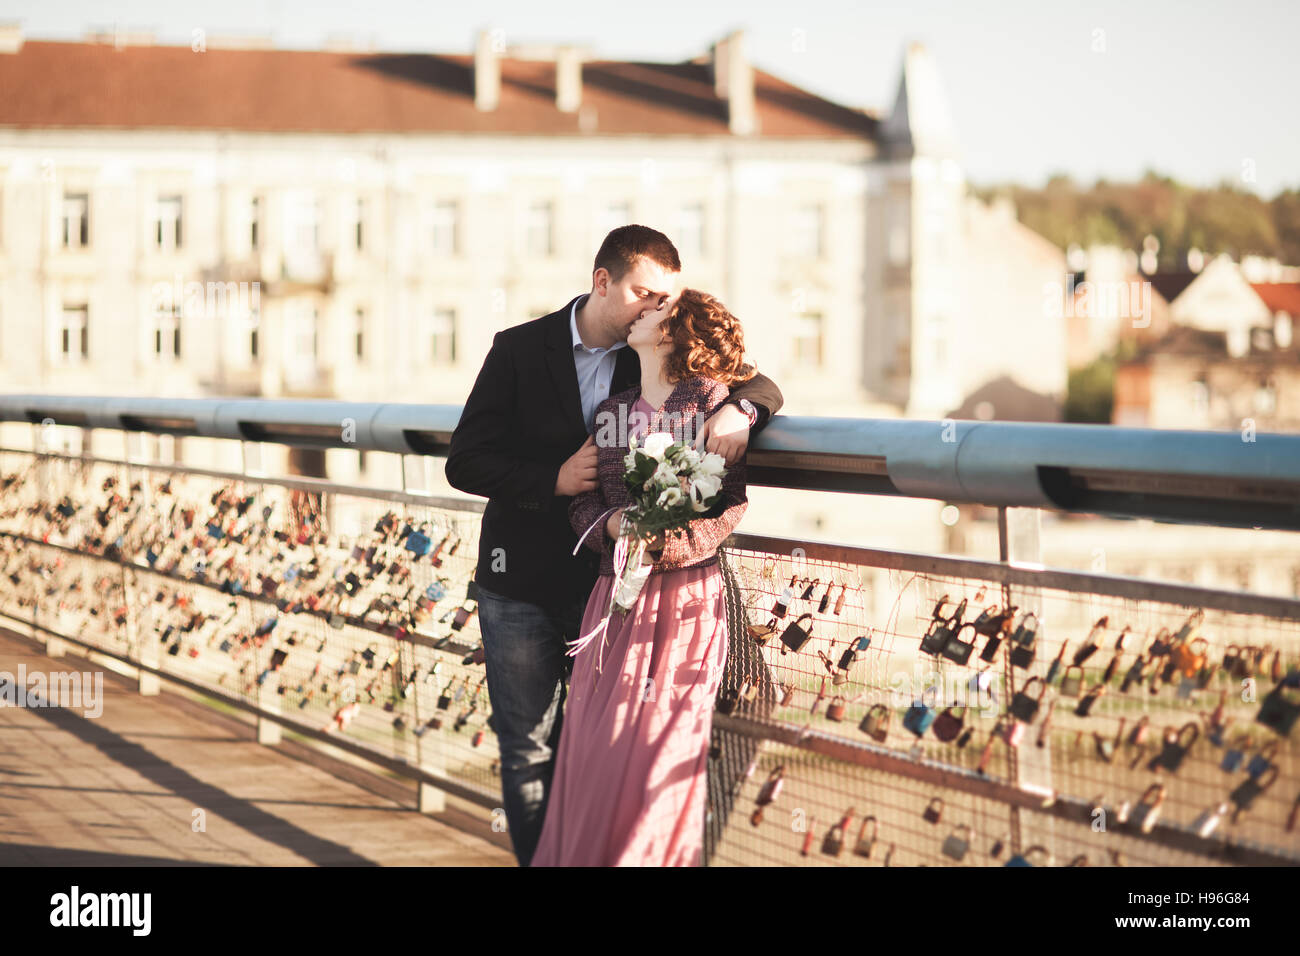 Stylish loving wedding couple, groom, bride with pink dress kissing and hugging on a bridge at sunset Stock Photo